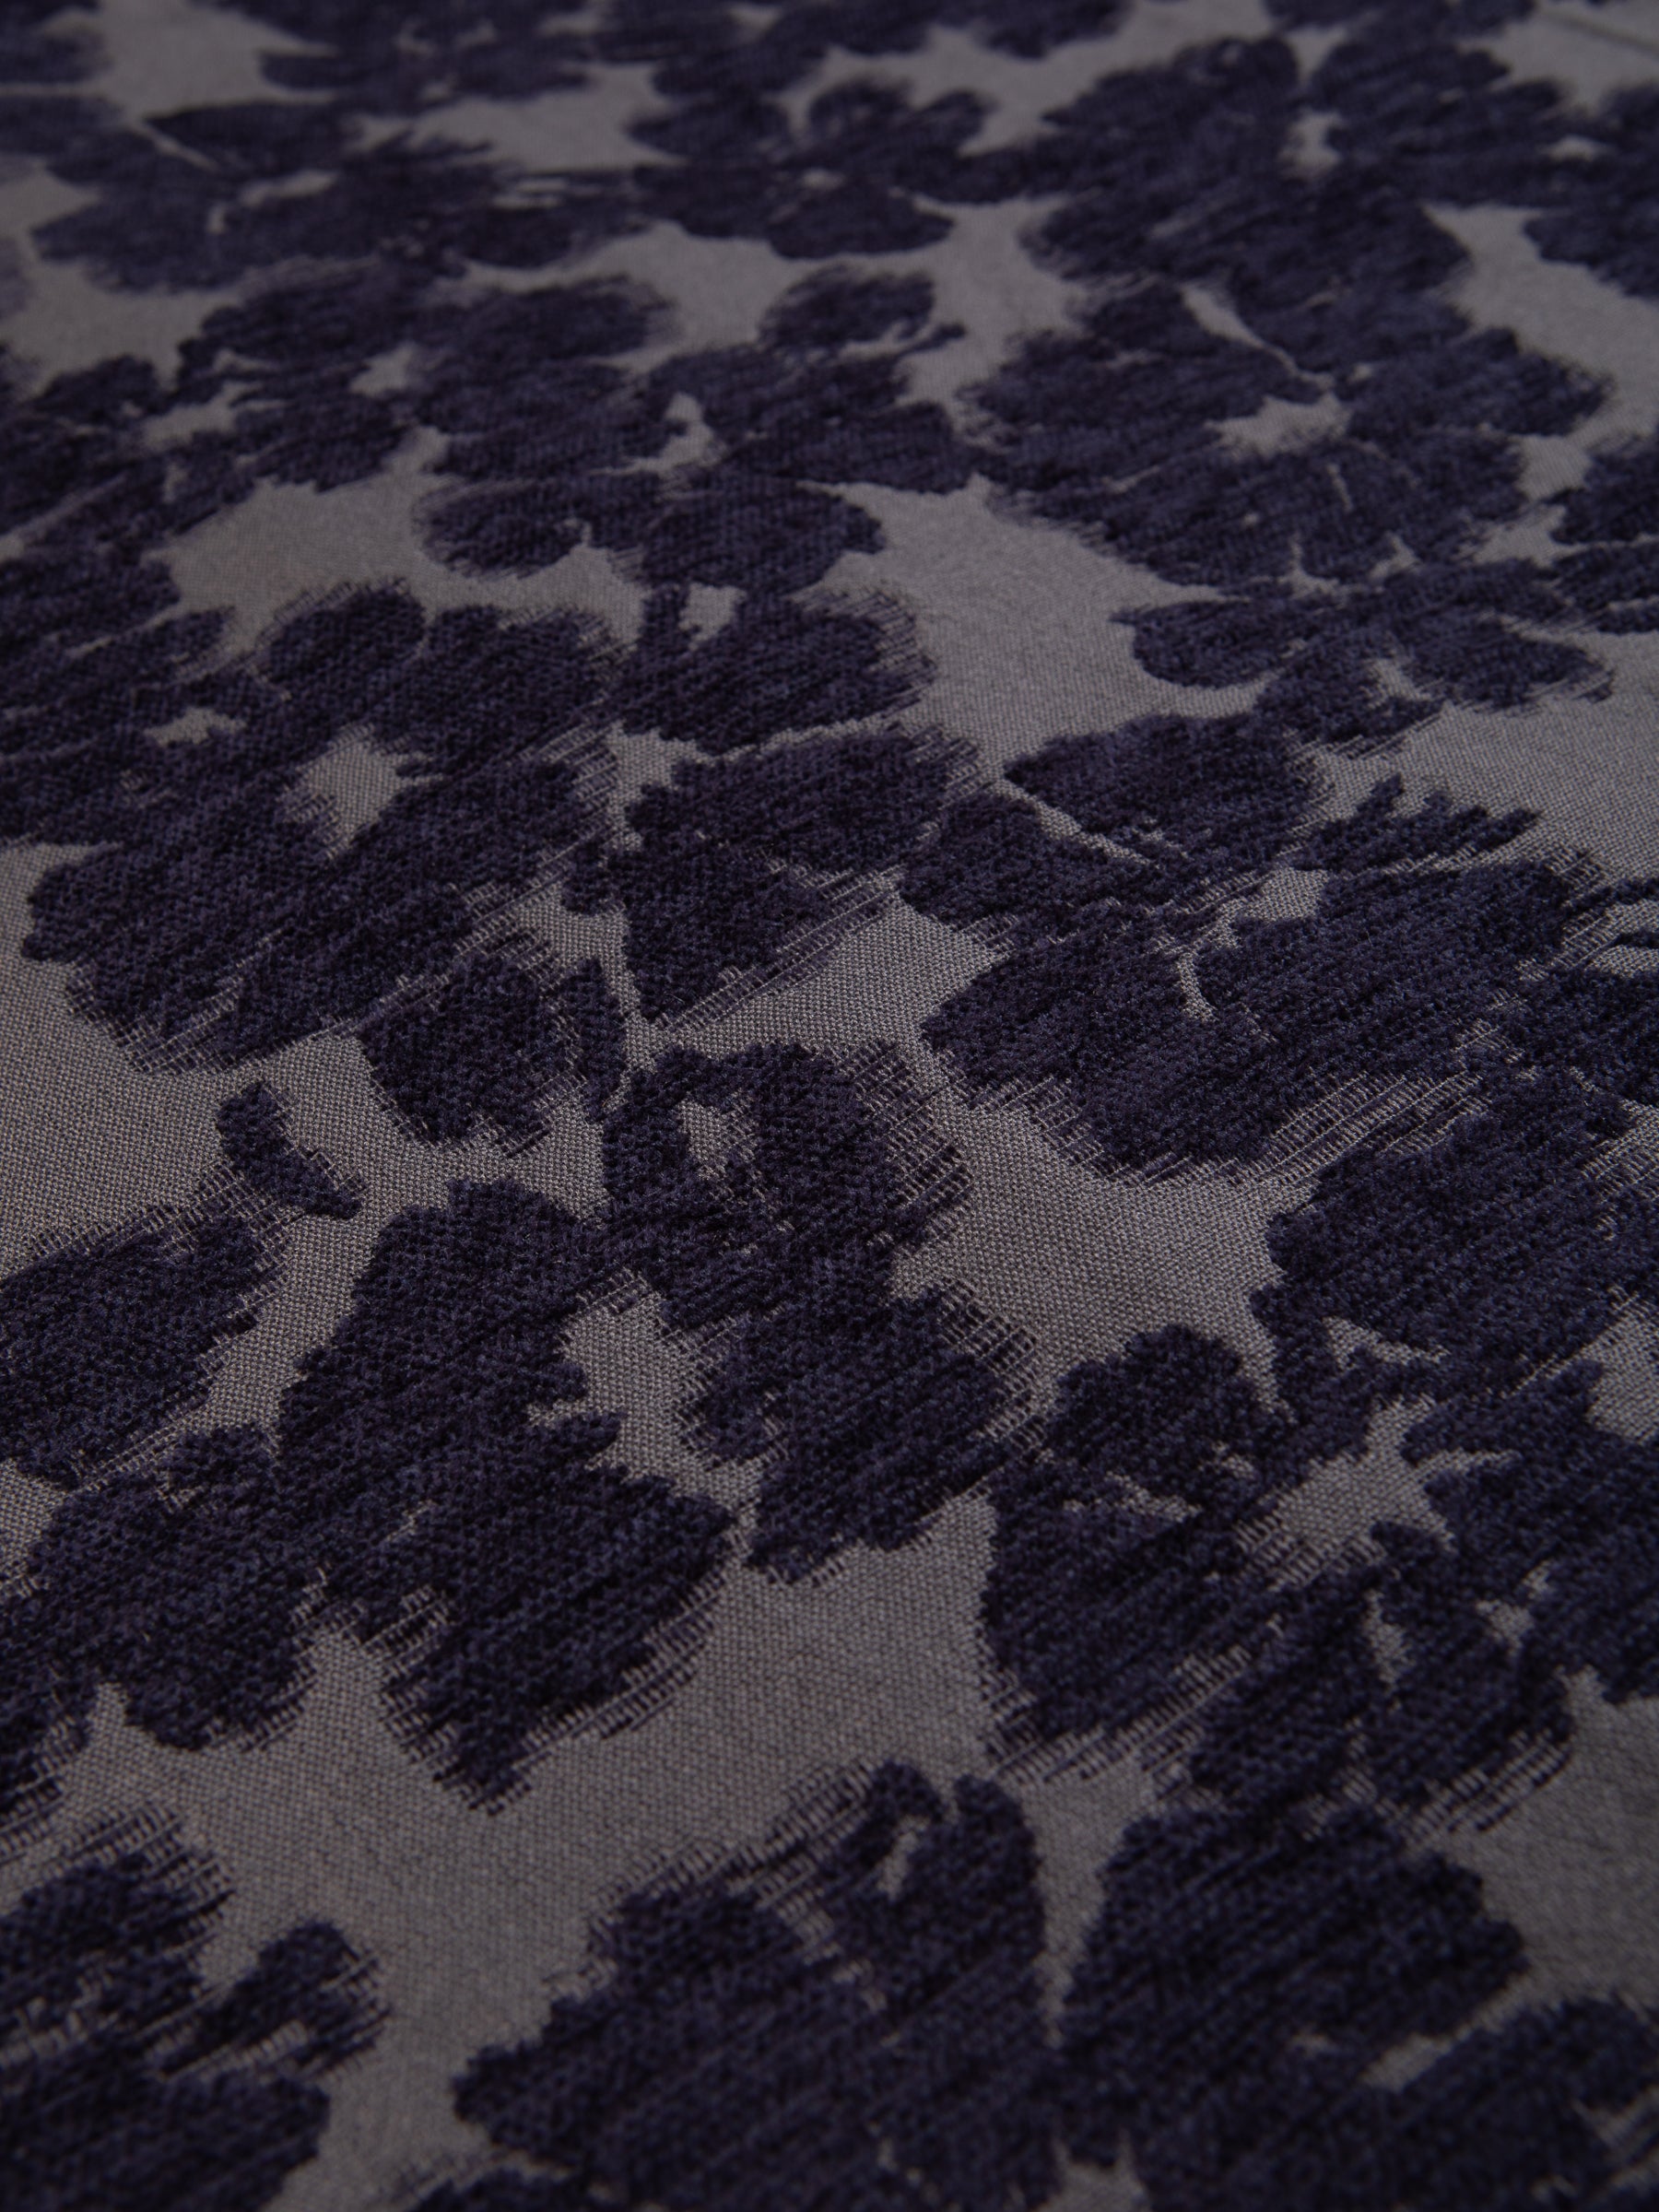 A floral fabric from Japan, used by Scottish menswear designer KESTIN.